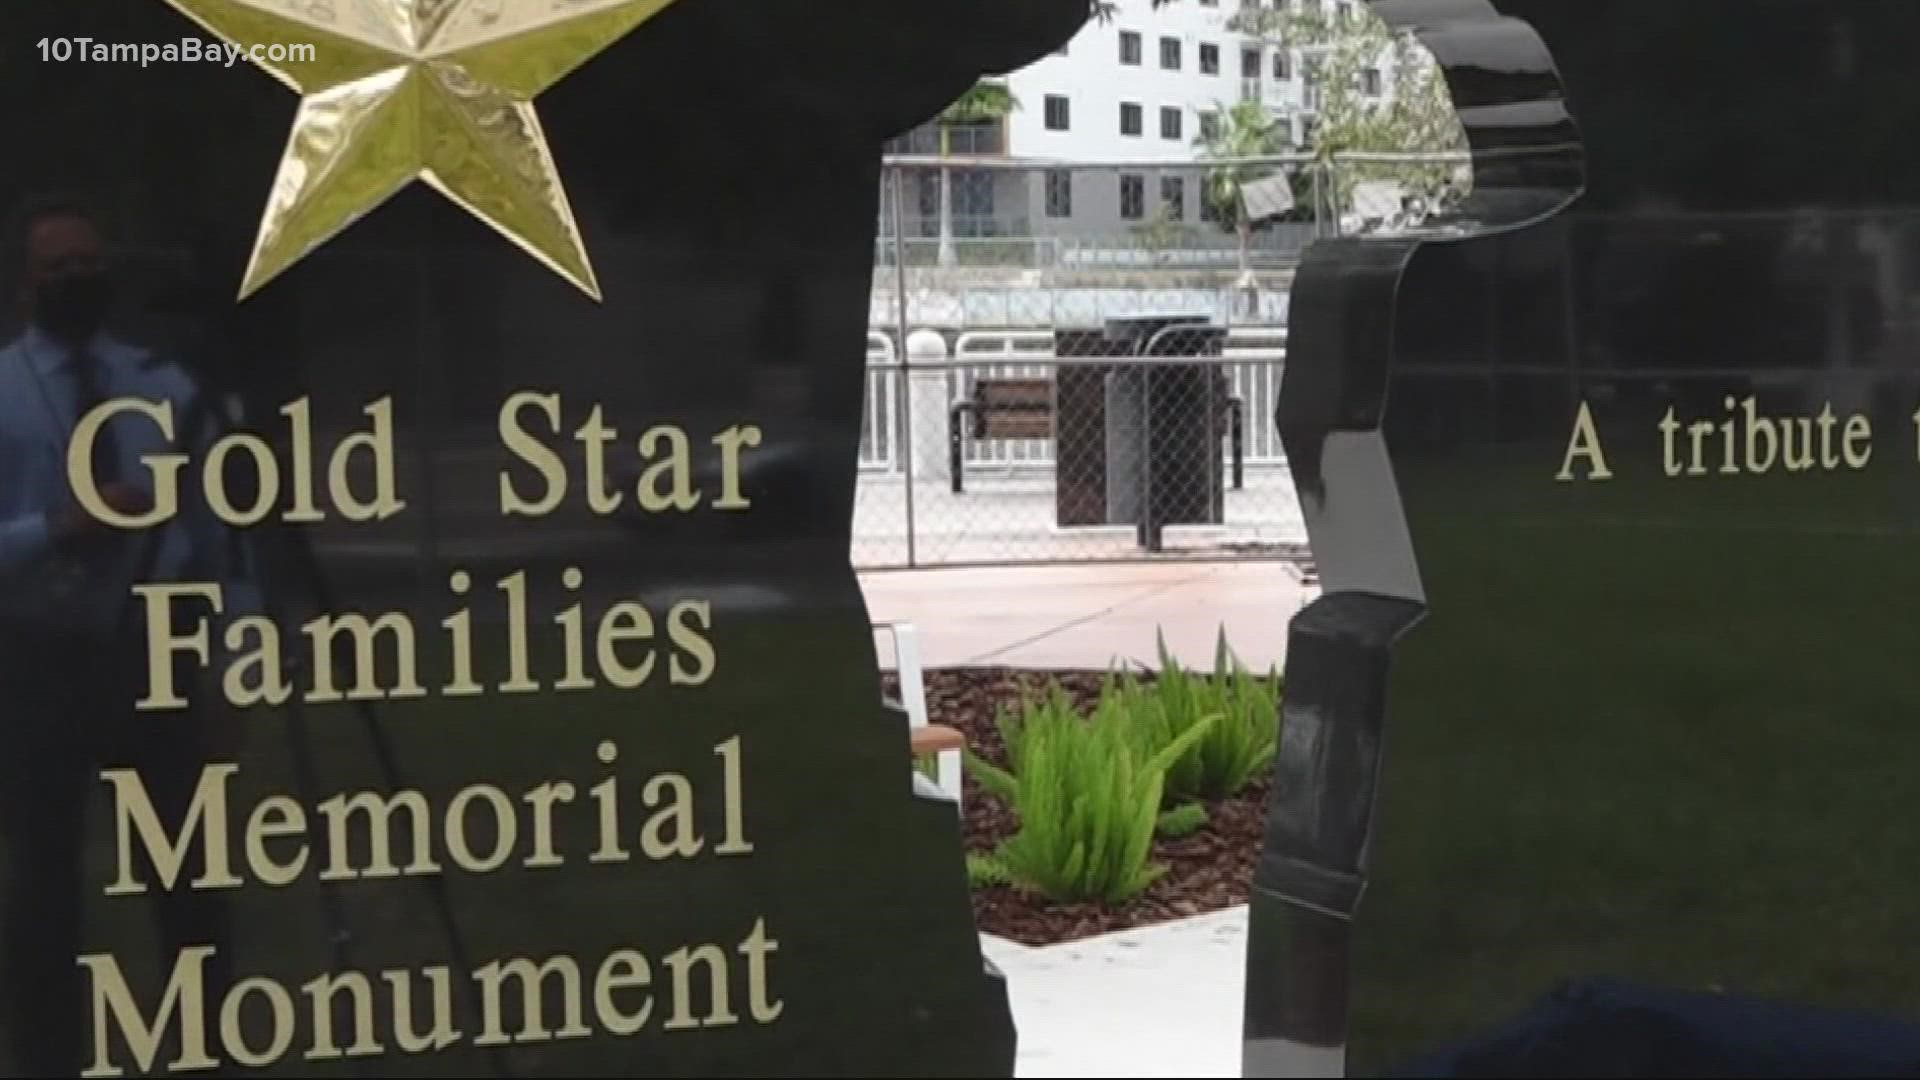 Gold Star family members hope the legislation passes and the holiday creates awareness about the sacrifice their loved ones and their families have made